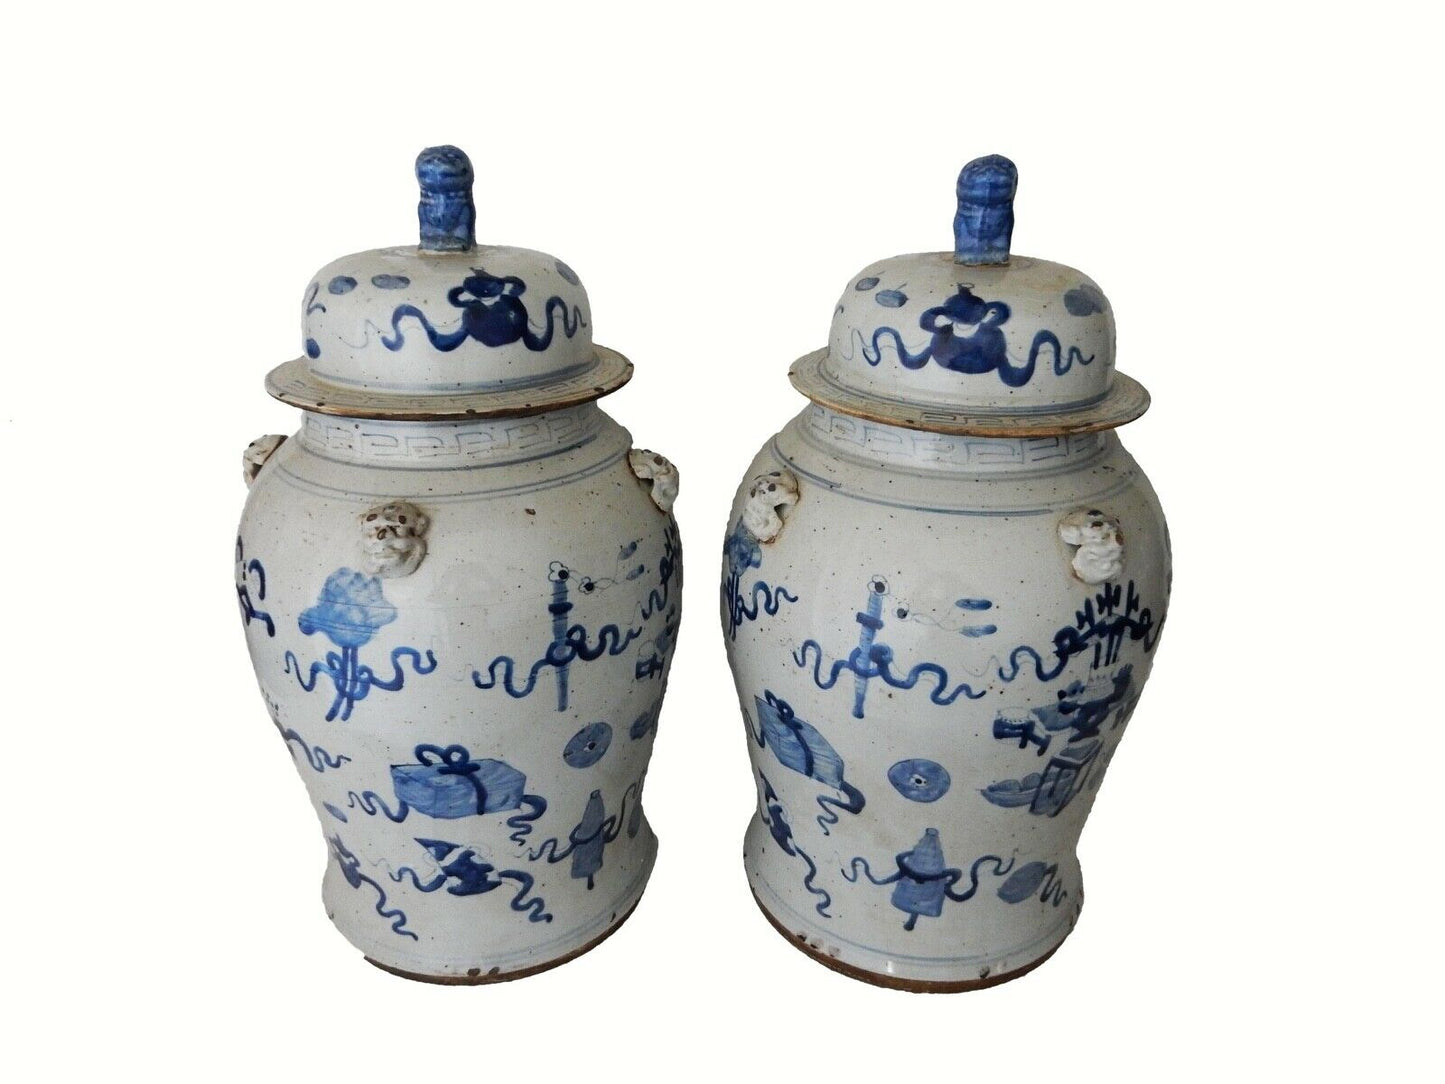 #143 Superb Large Chinoiserie Blue & White Ginger Jars - a Pair 23" H